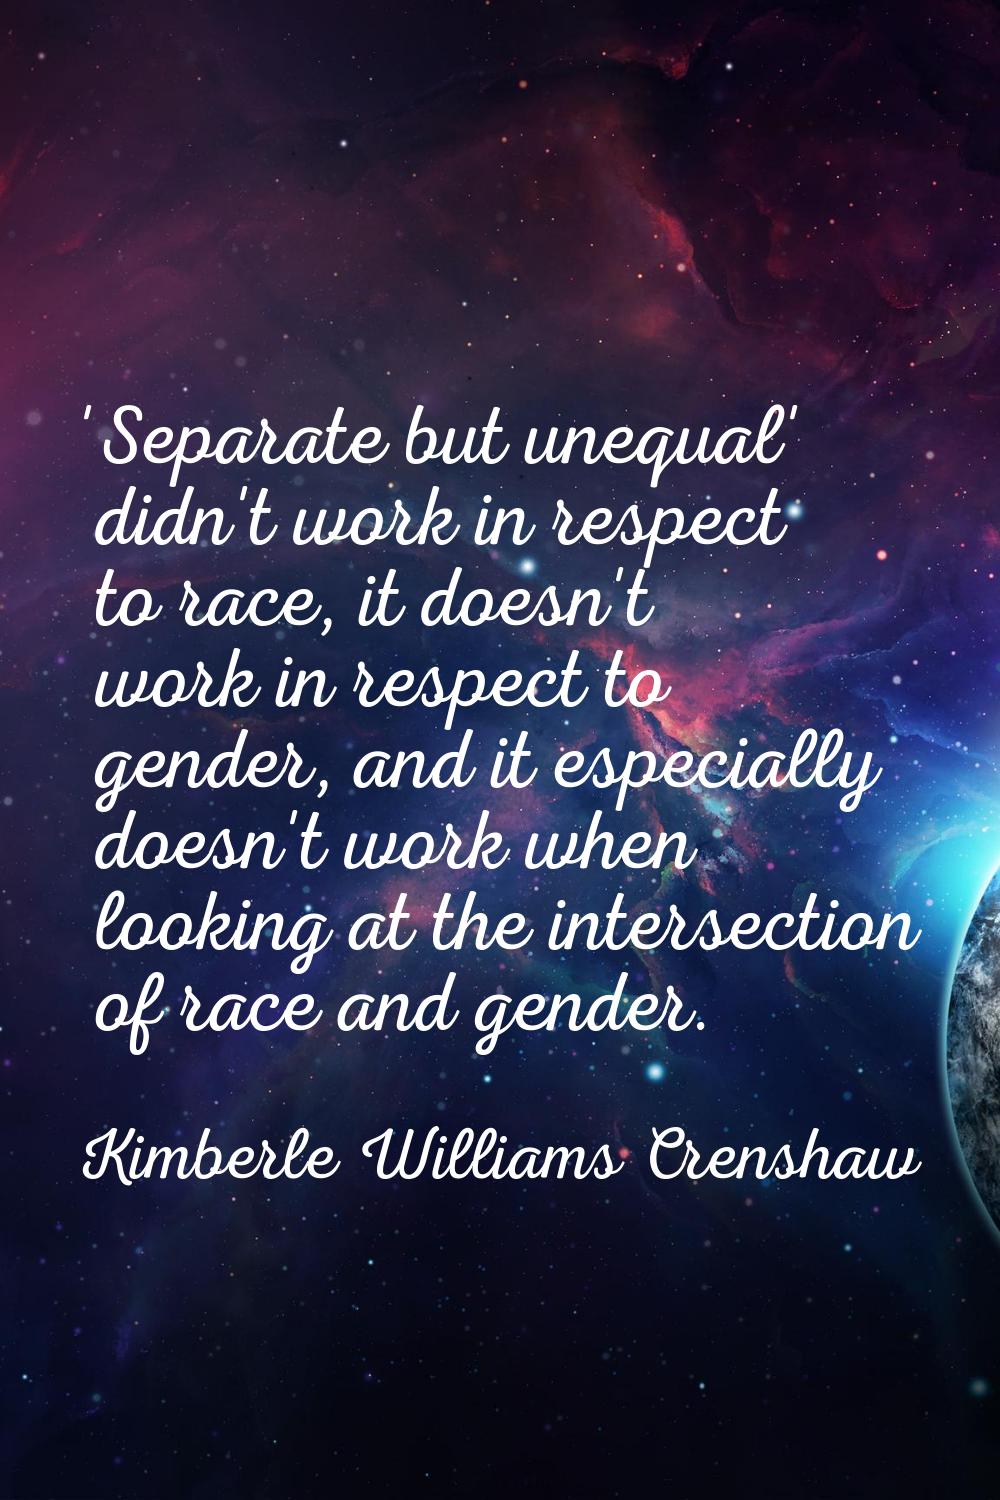 'Separate but unequal' didn't work in respect to race, it doesn't work in respect to gender, and it